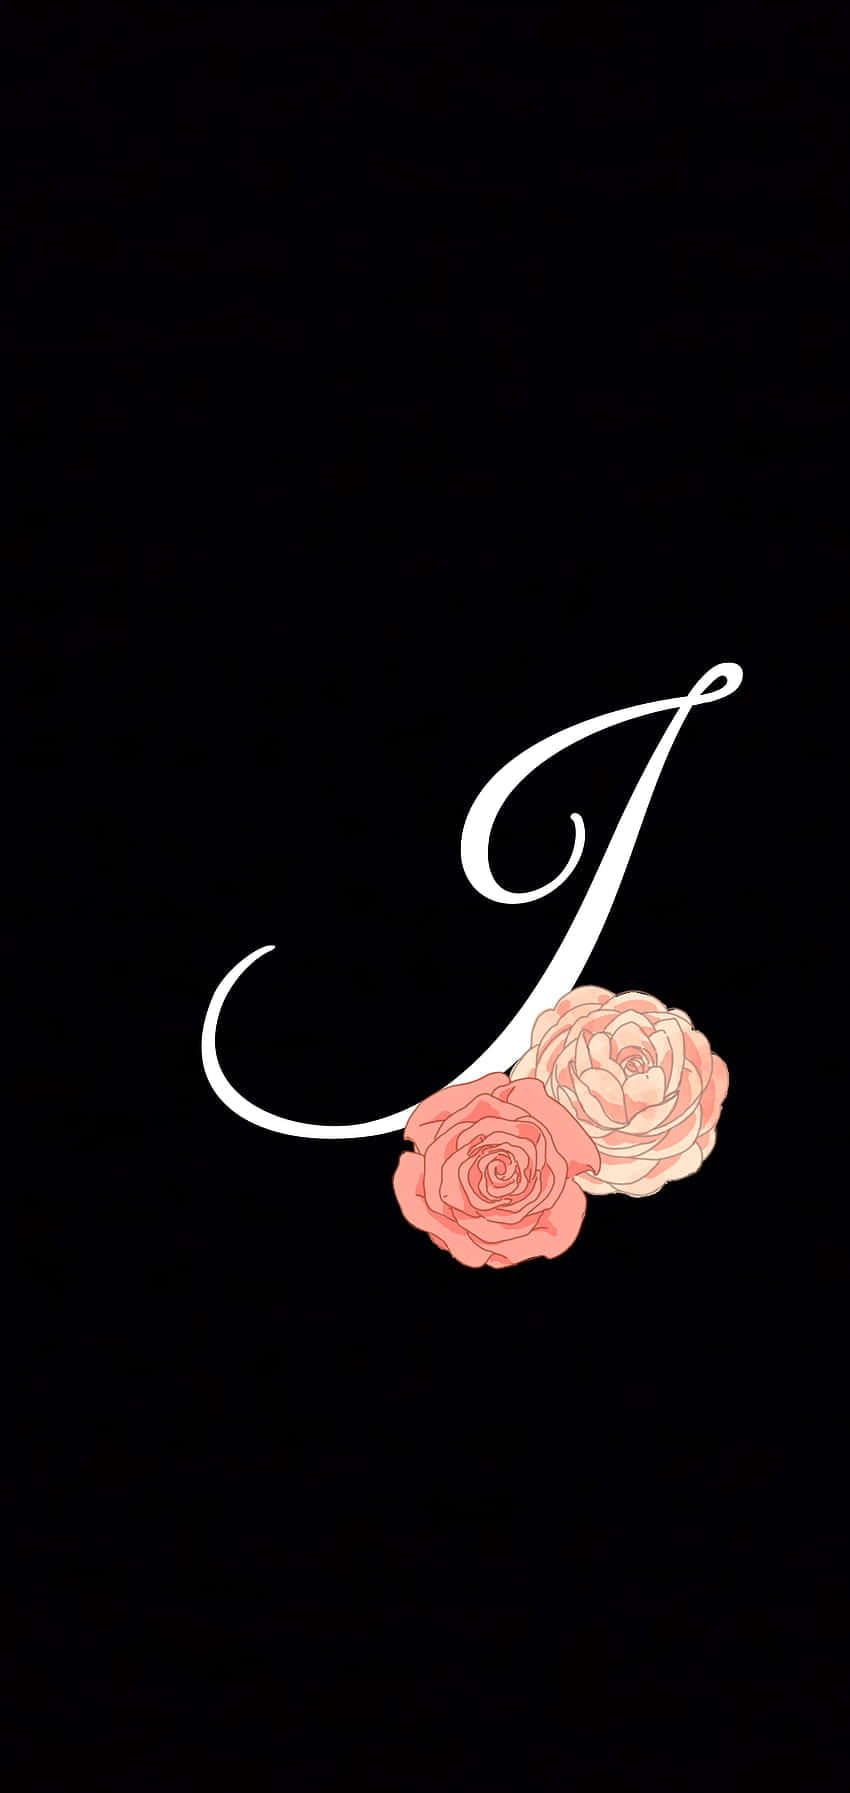 Cursive J Initial With Flowers Wallpaper